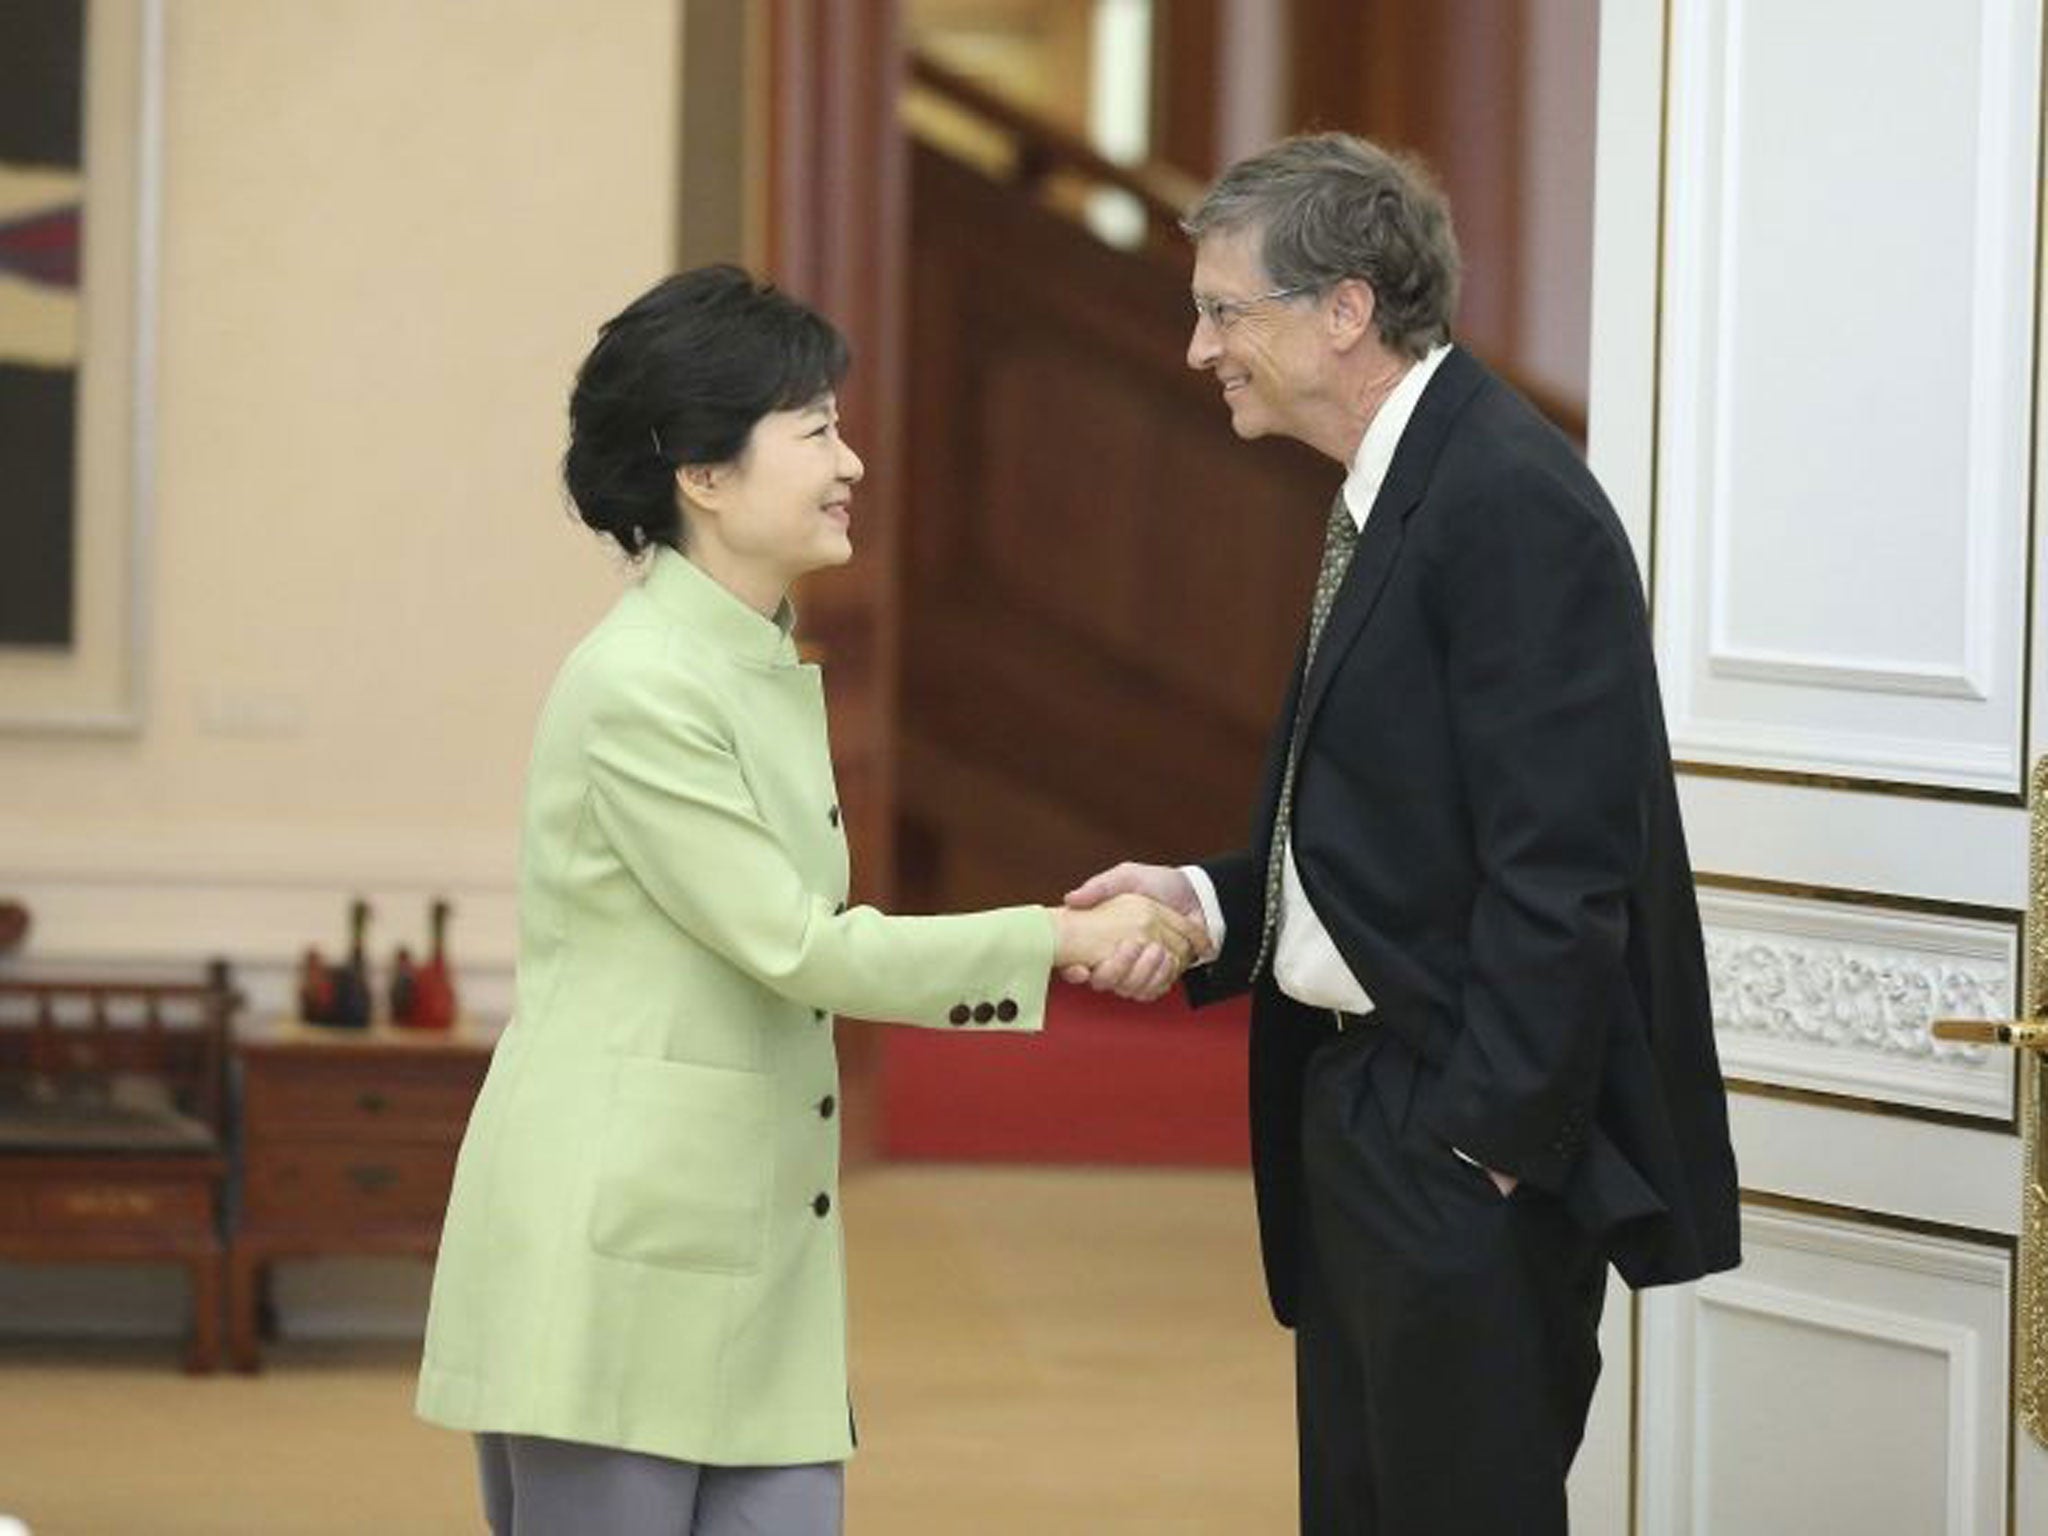 The Microsoft founder has been accused of disrespecting the South Korean President, Park Geun-hye, after he was pictured shaking hands with her - with his other hand firmly in his pocket.